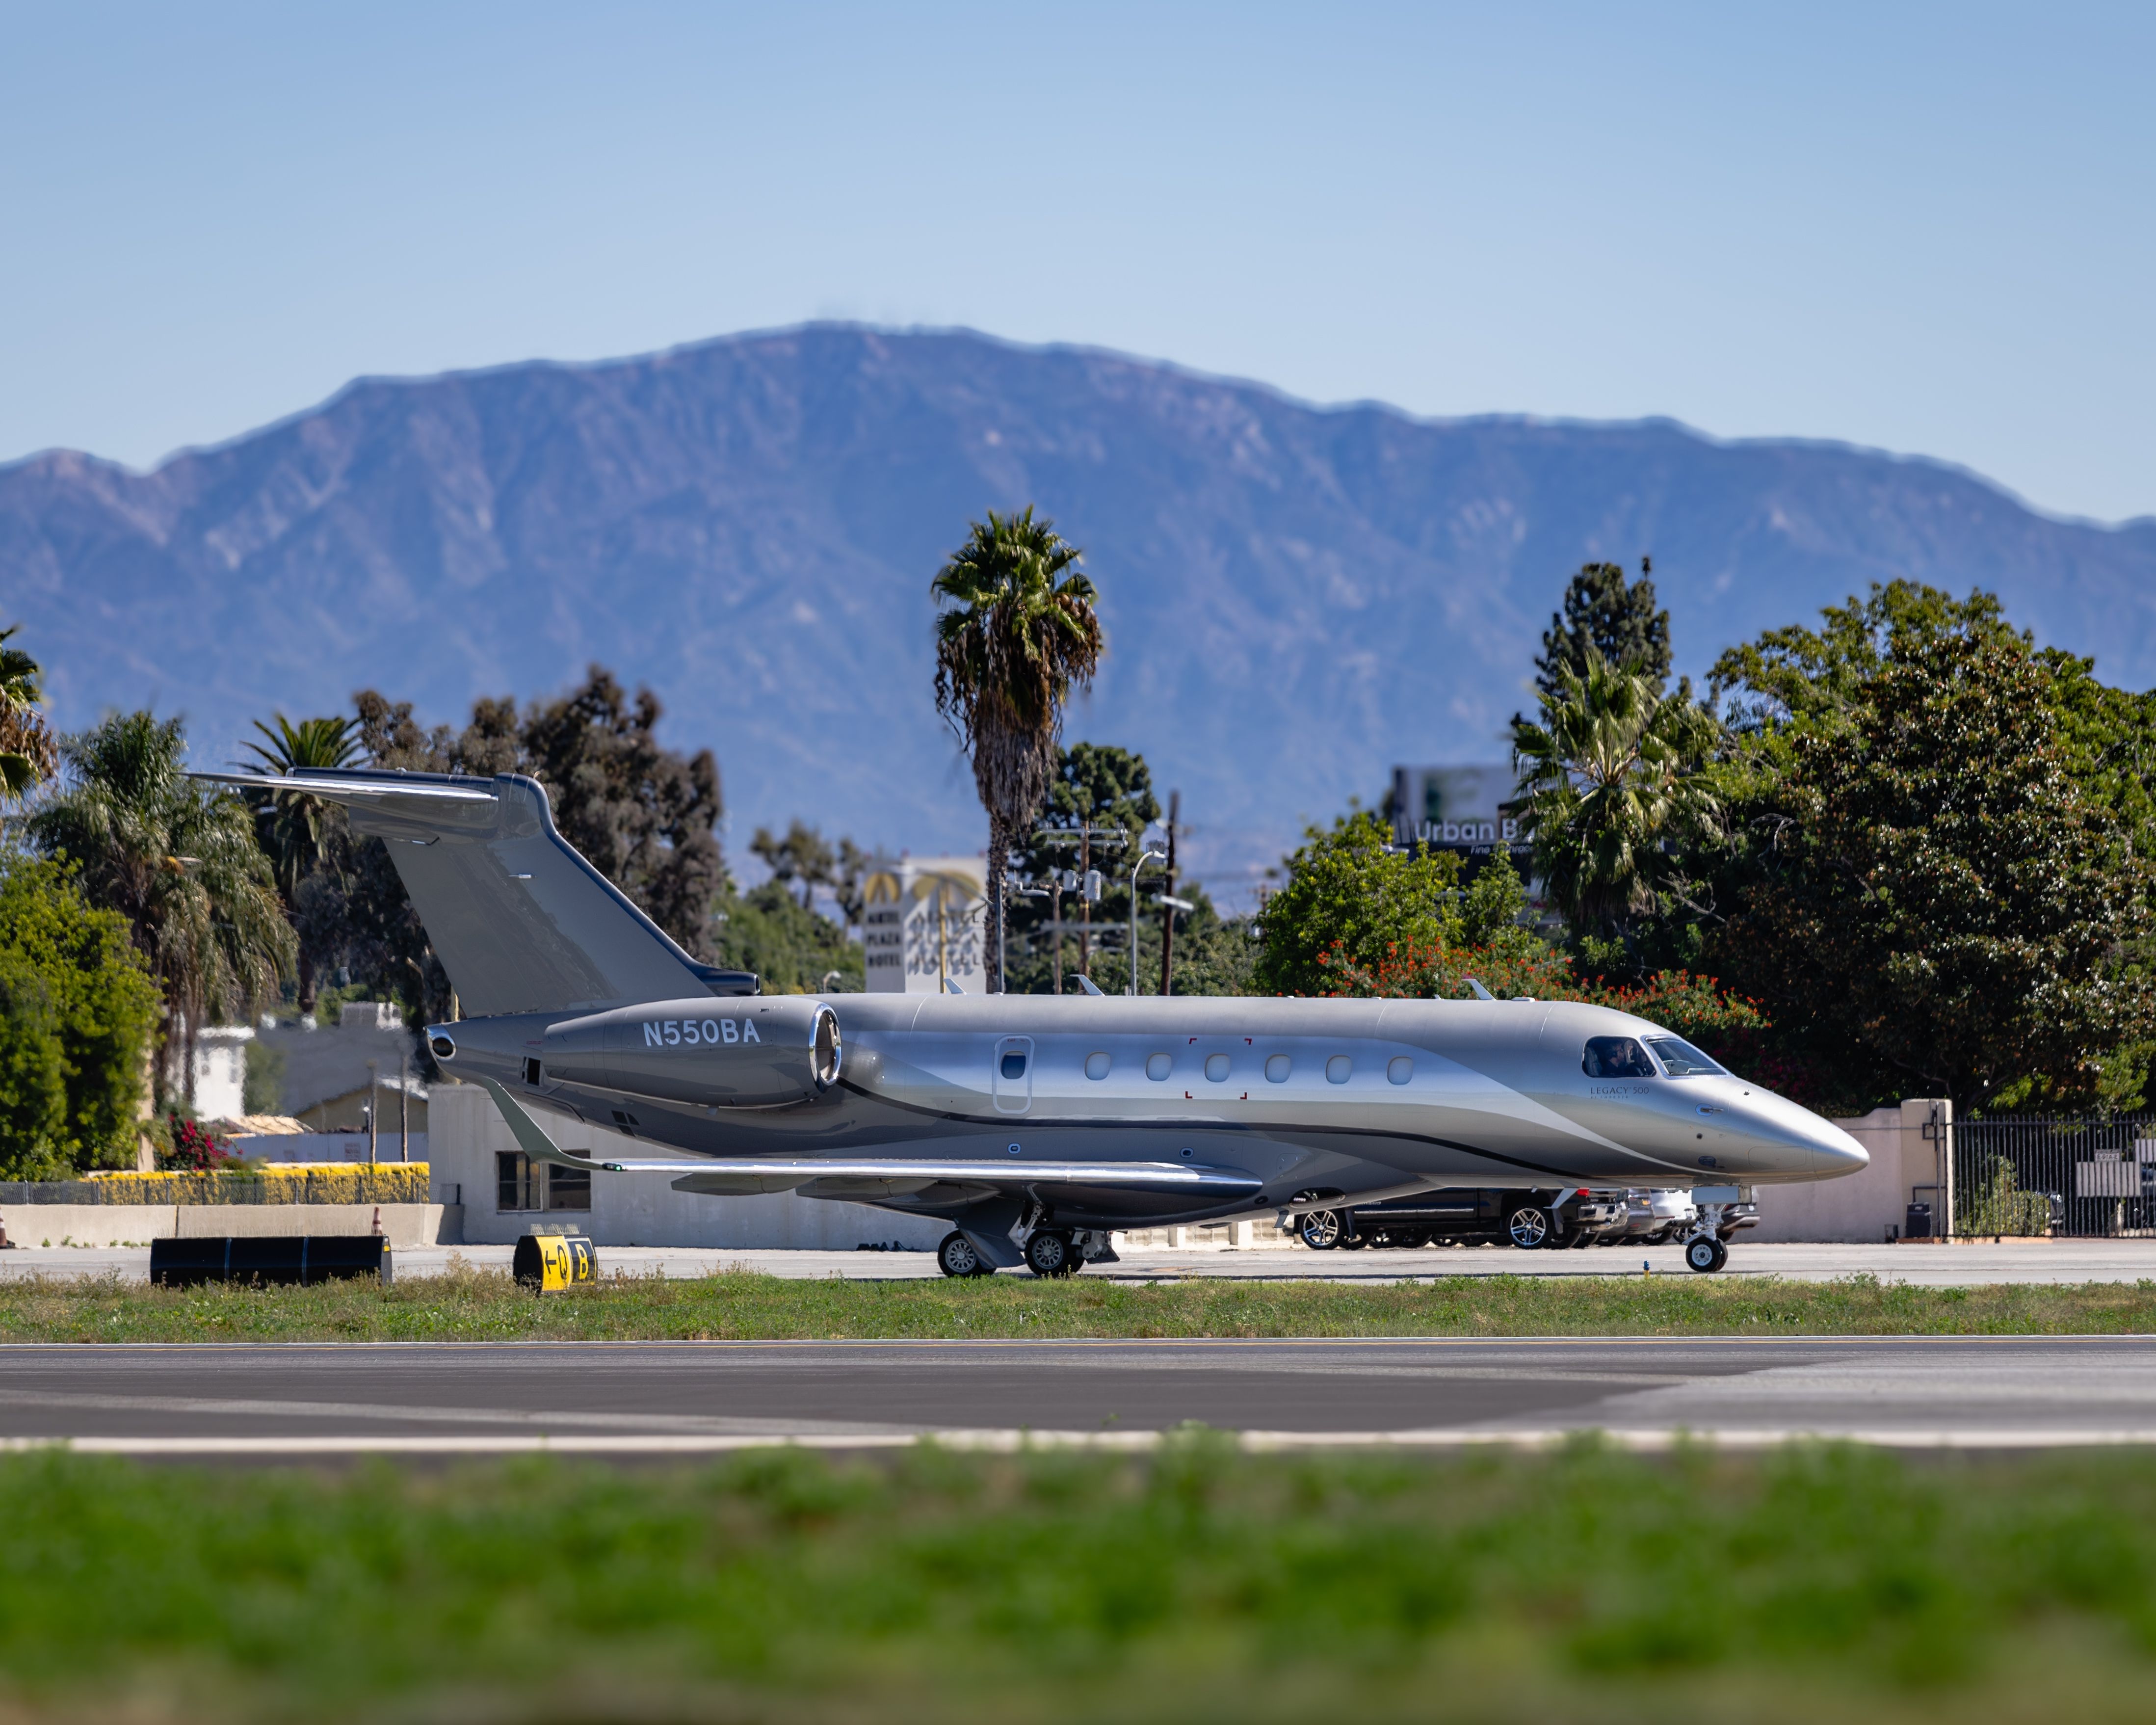 A Legacy 500 built by Embraer in Brazil is seen taxing down for departure.